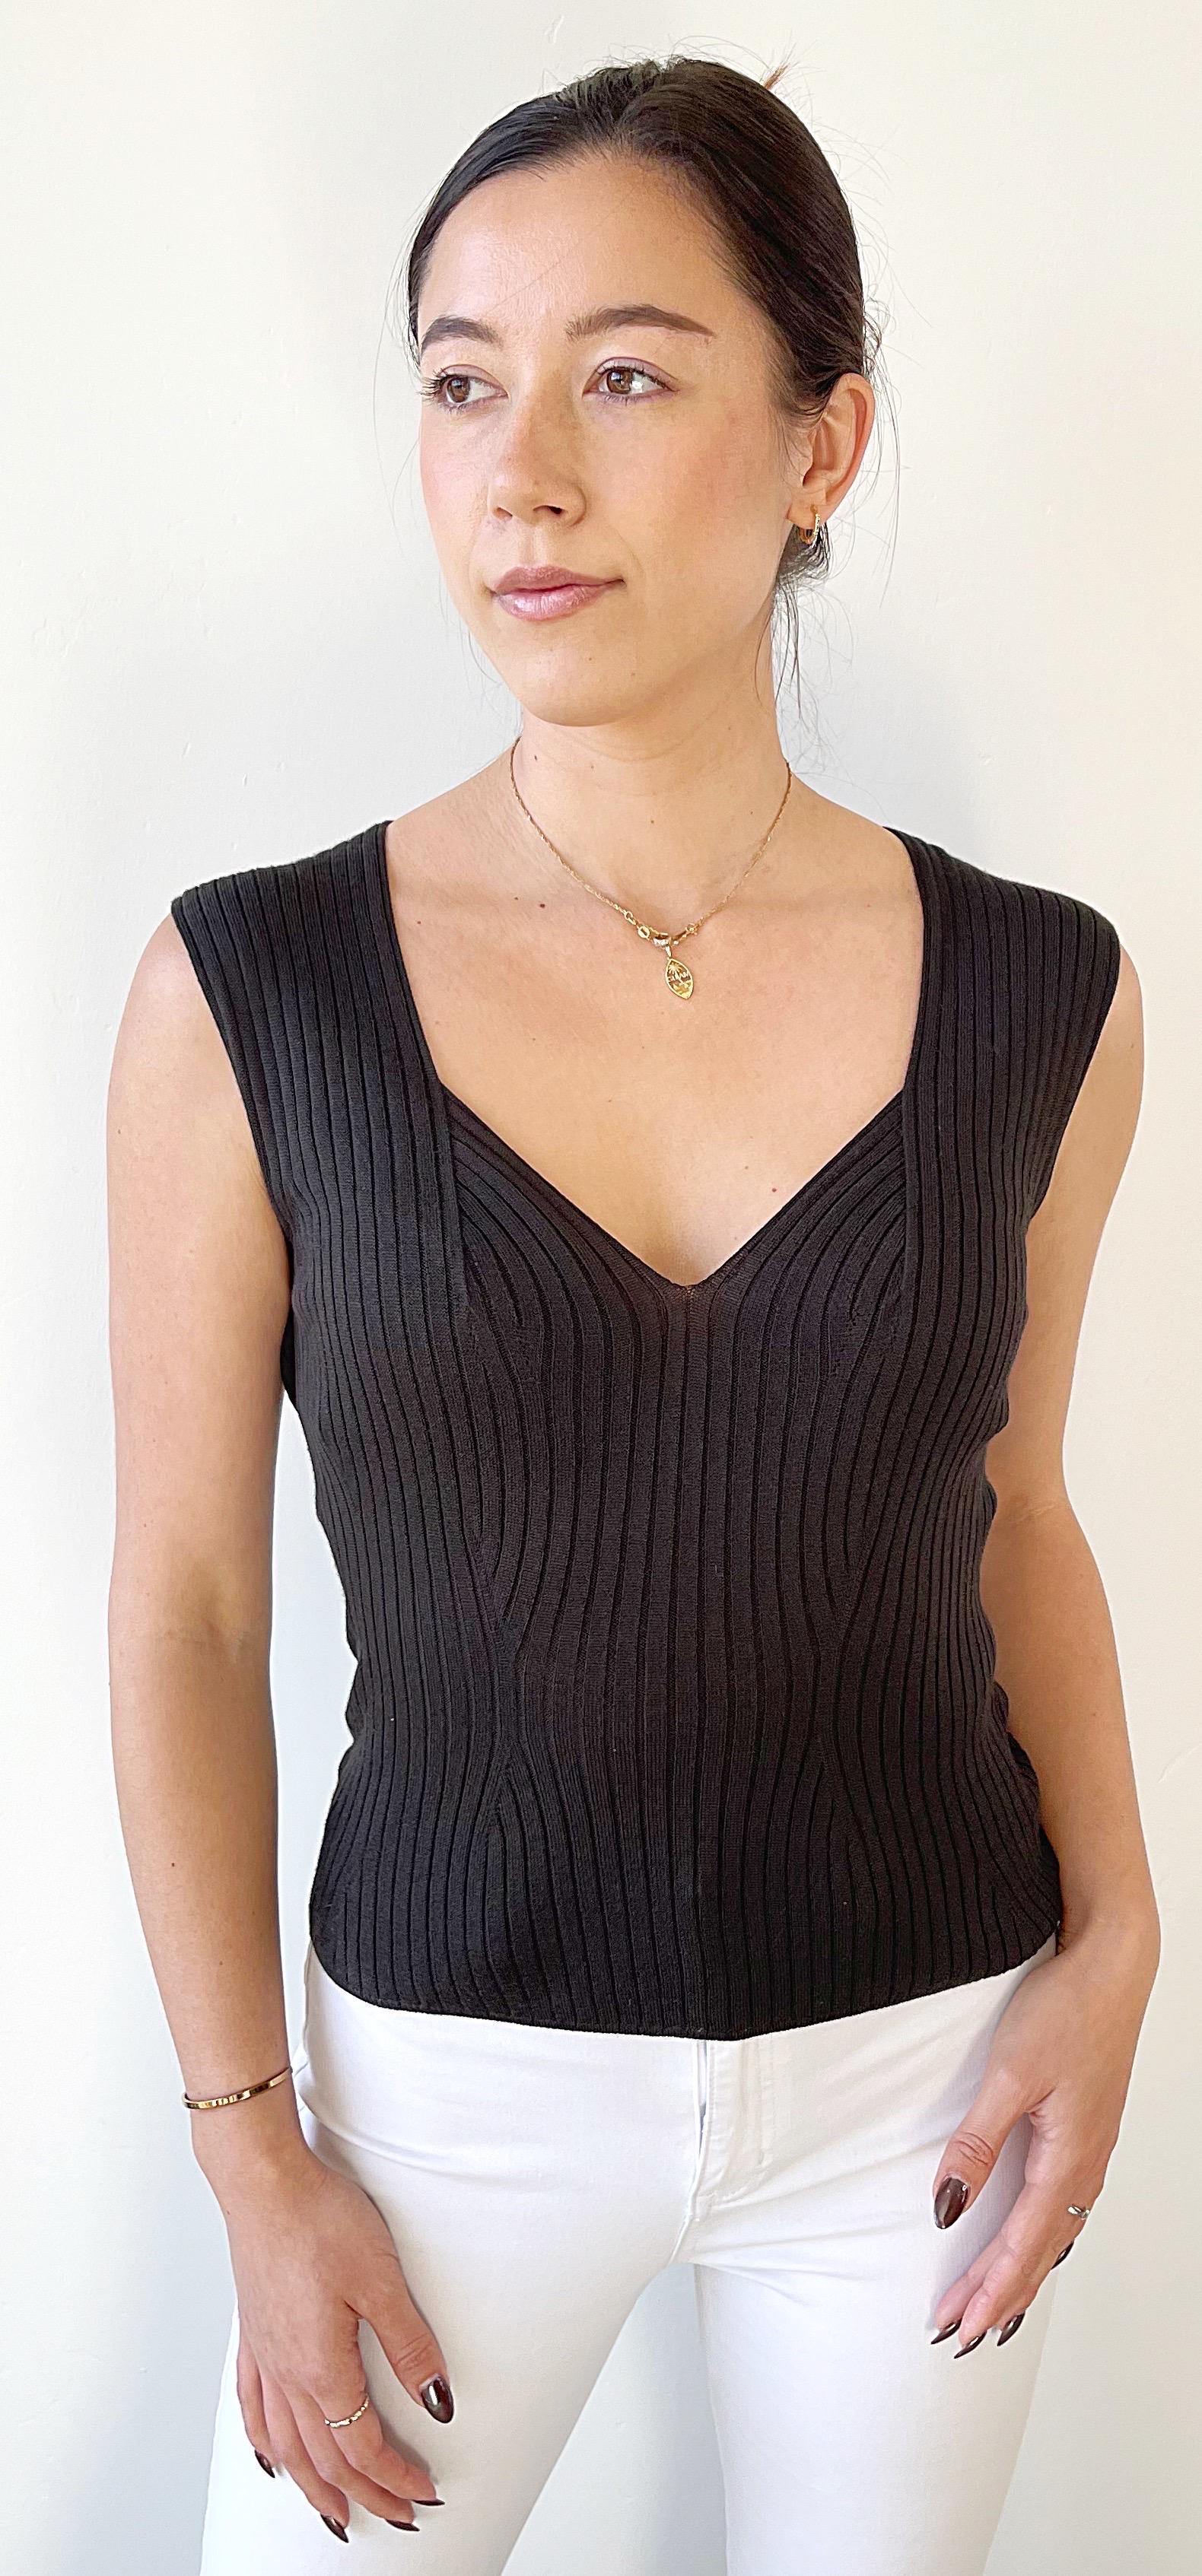 Yves Saint Laurent by Tom Ford Spring 2003 Brown Ribbed Sleeveless Vintage Top For Sale 11